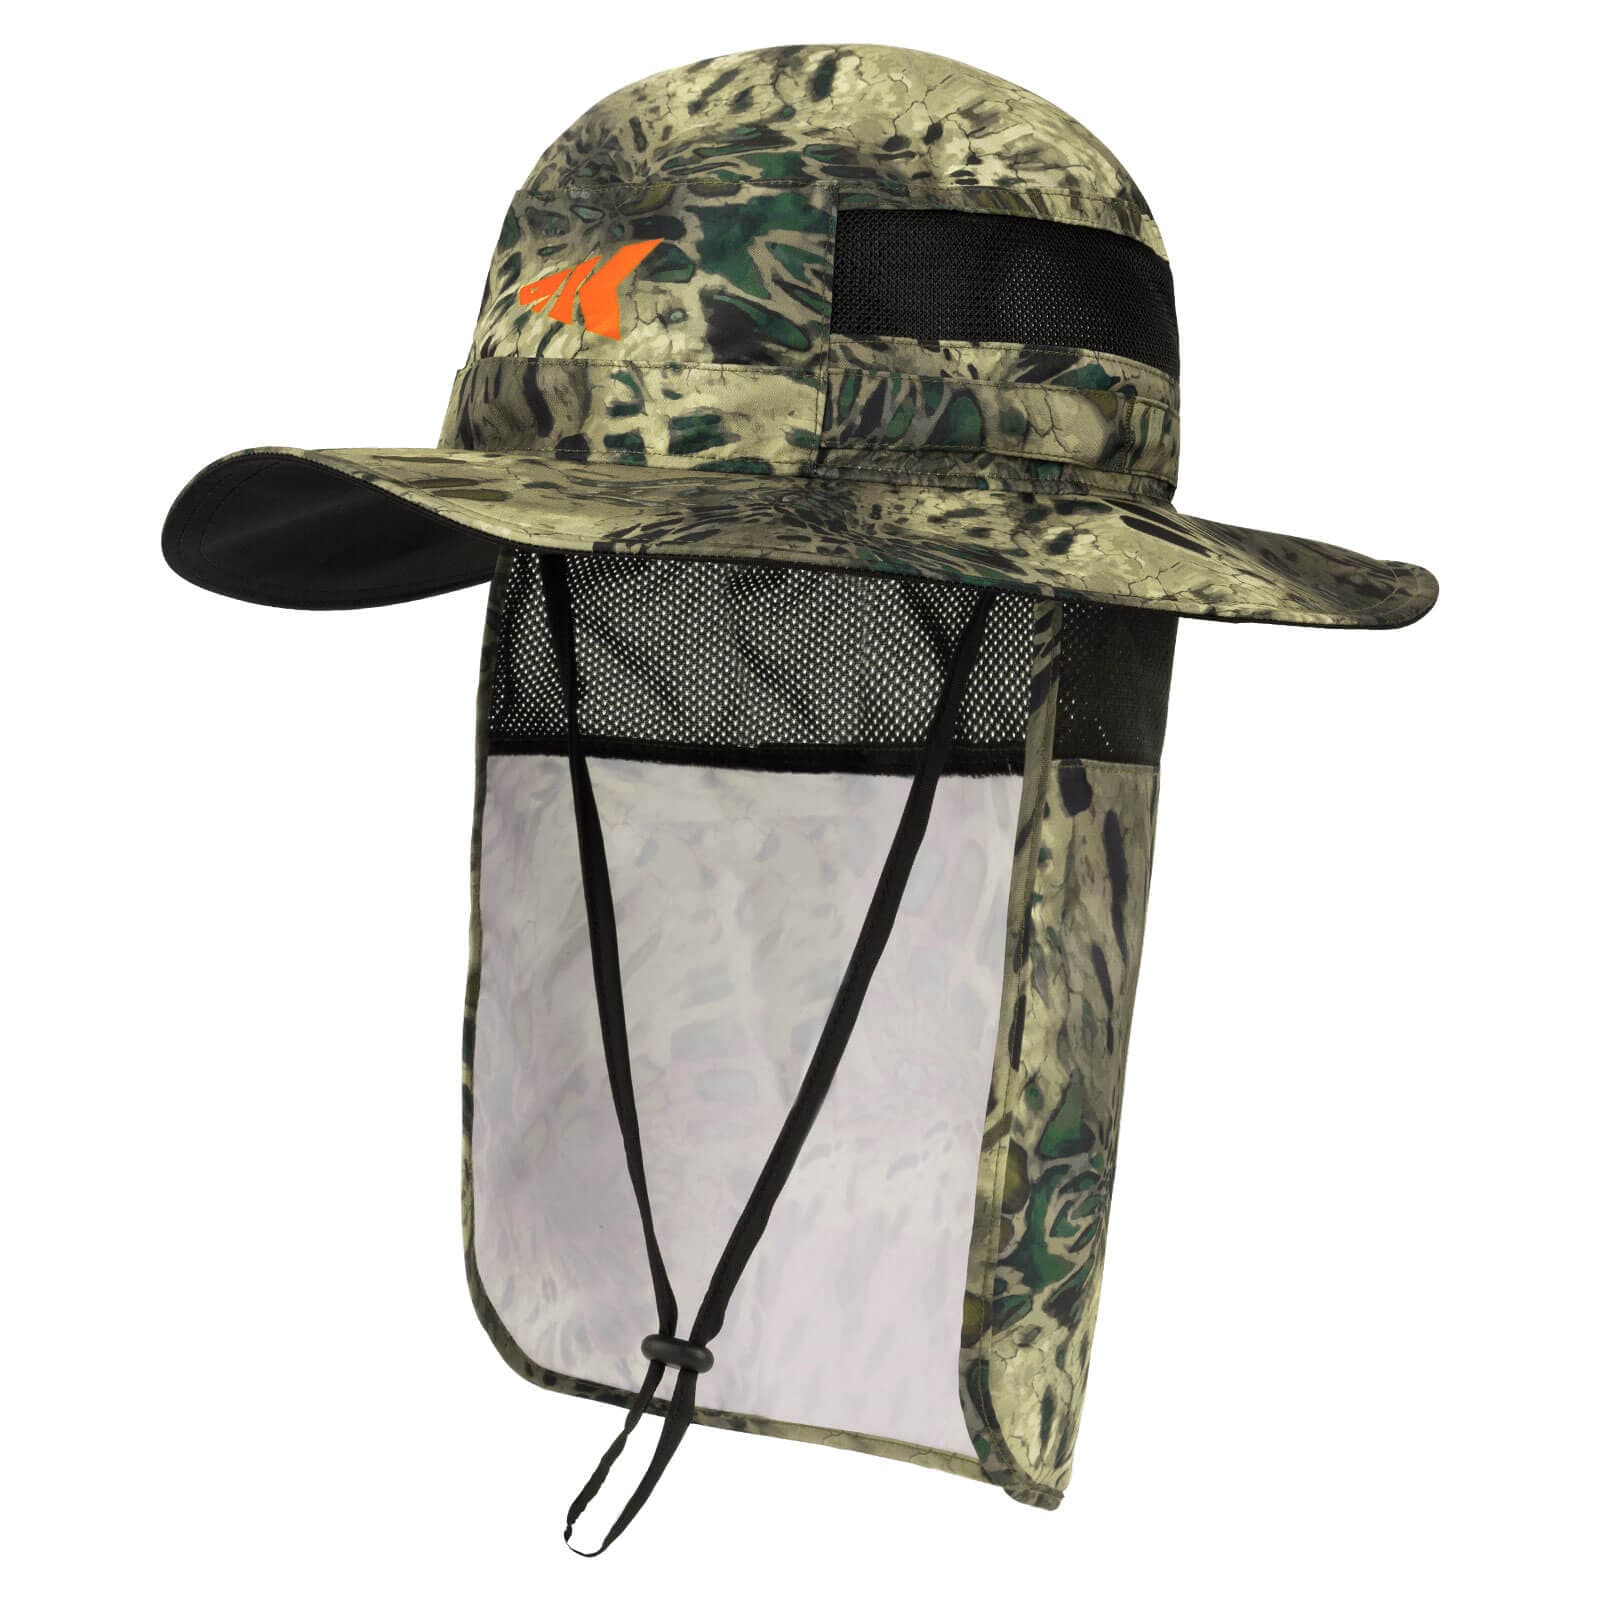 KastKing Sun Protection Fishing Hat Breathable Outdoor Sports Hat